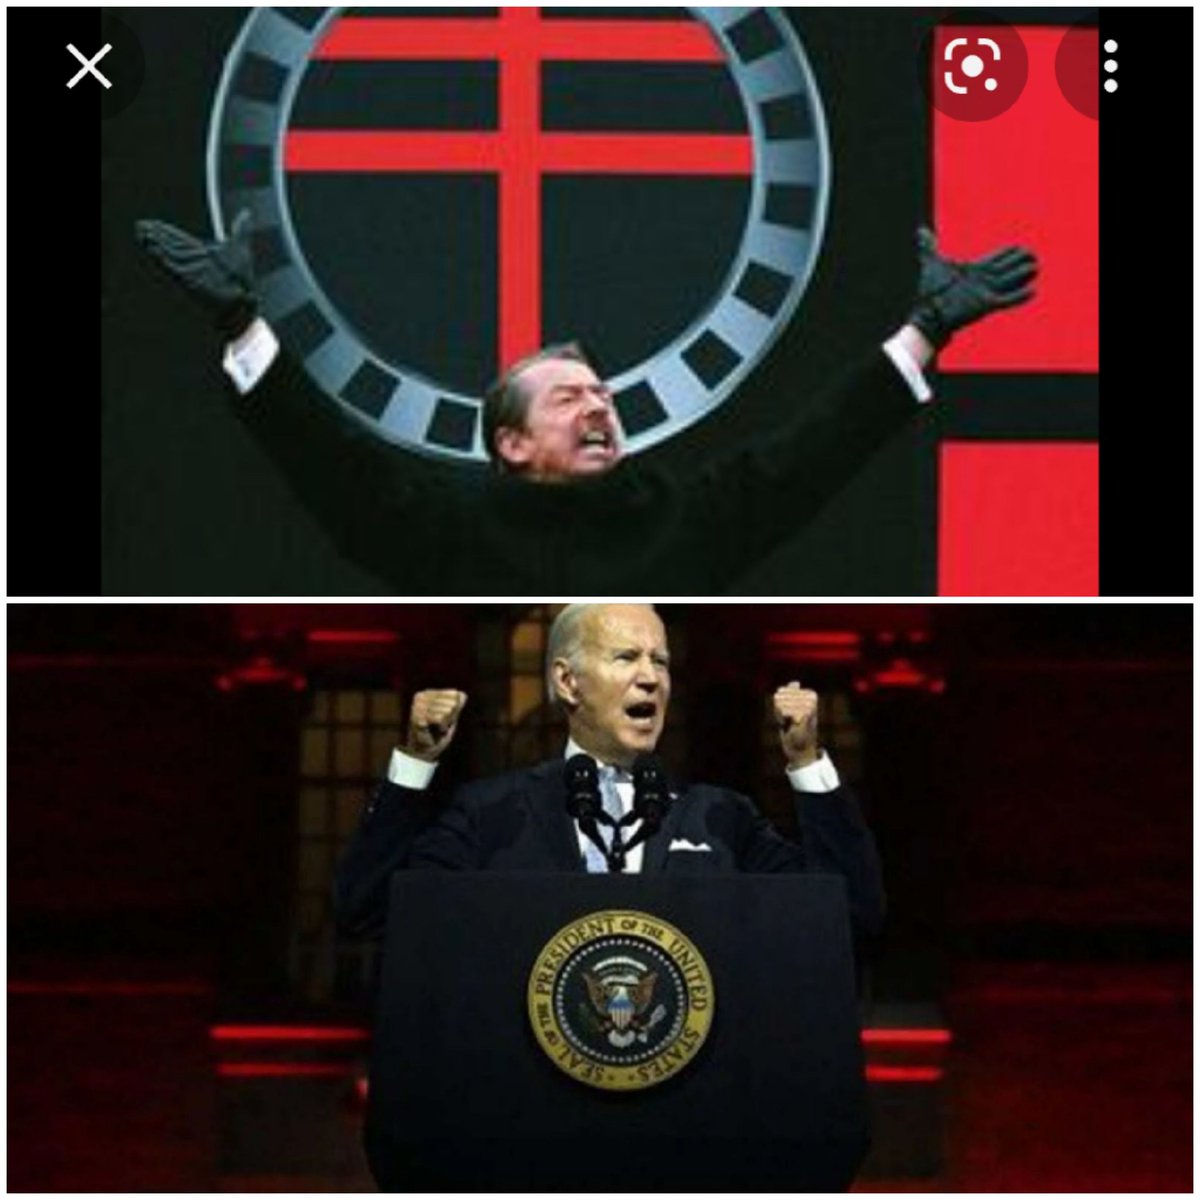 Looks like a shot from the movie V for  Vendetta... British dystopian future of England after being ravaged by a pandemic,famine, and war. 

All it takes for the world to change is an idea. Hmm. What is their idea NWO🤔
 Mr,MrsBiden wore Tiffany blue